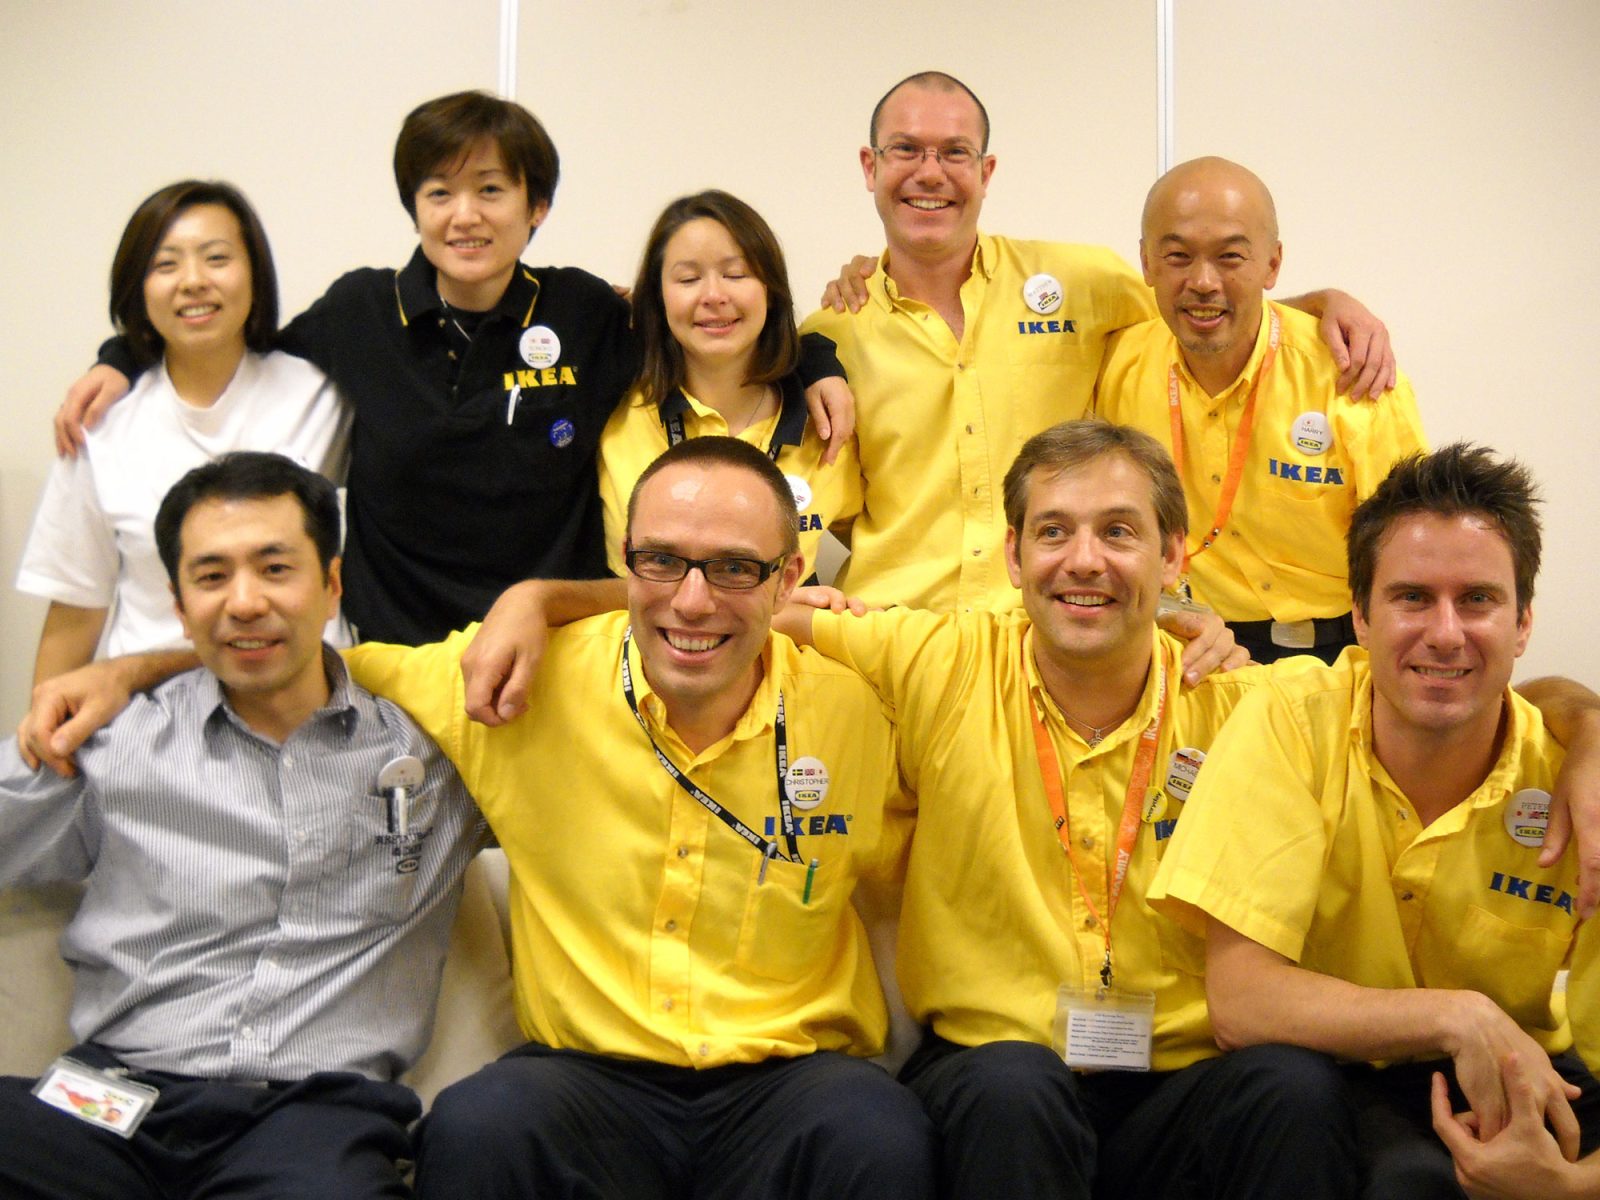 Group photo of seated happy people in IKEA staff uniforms.